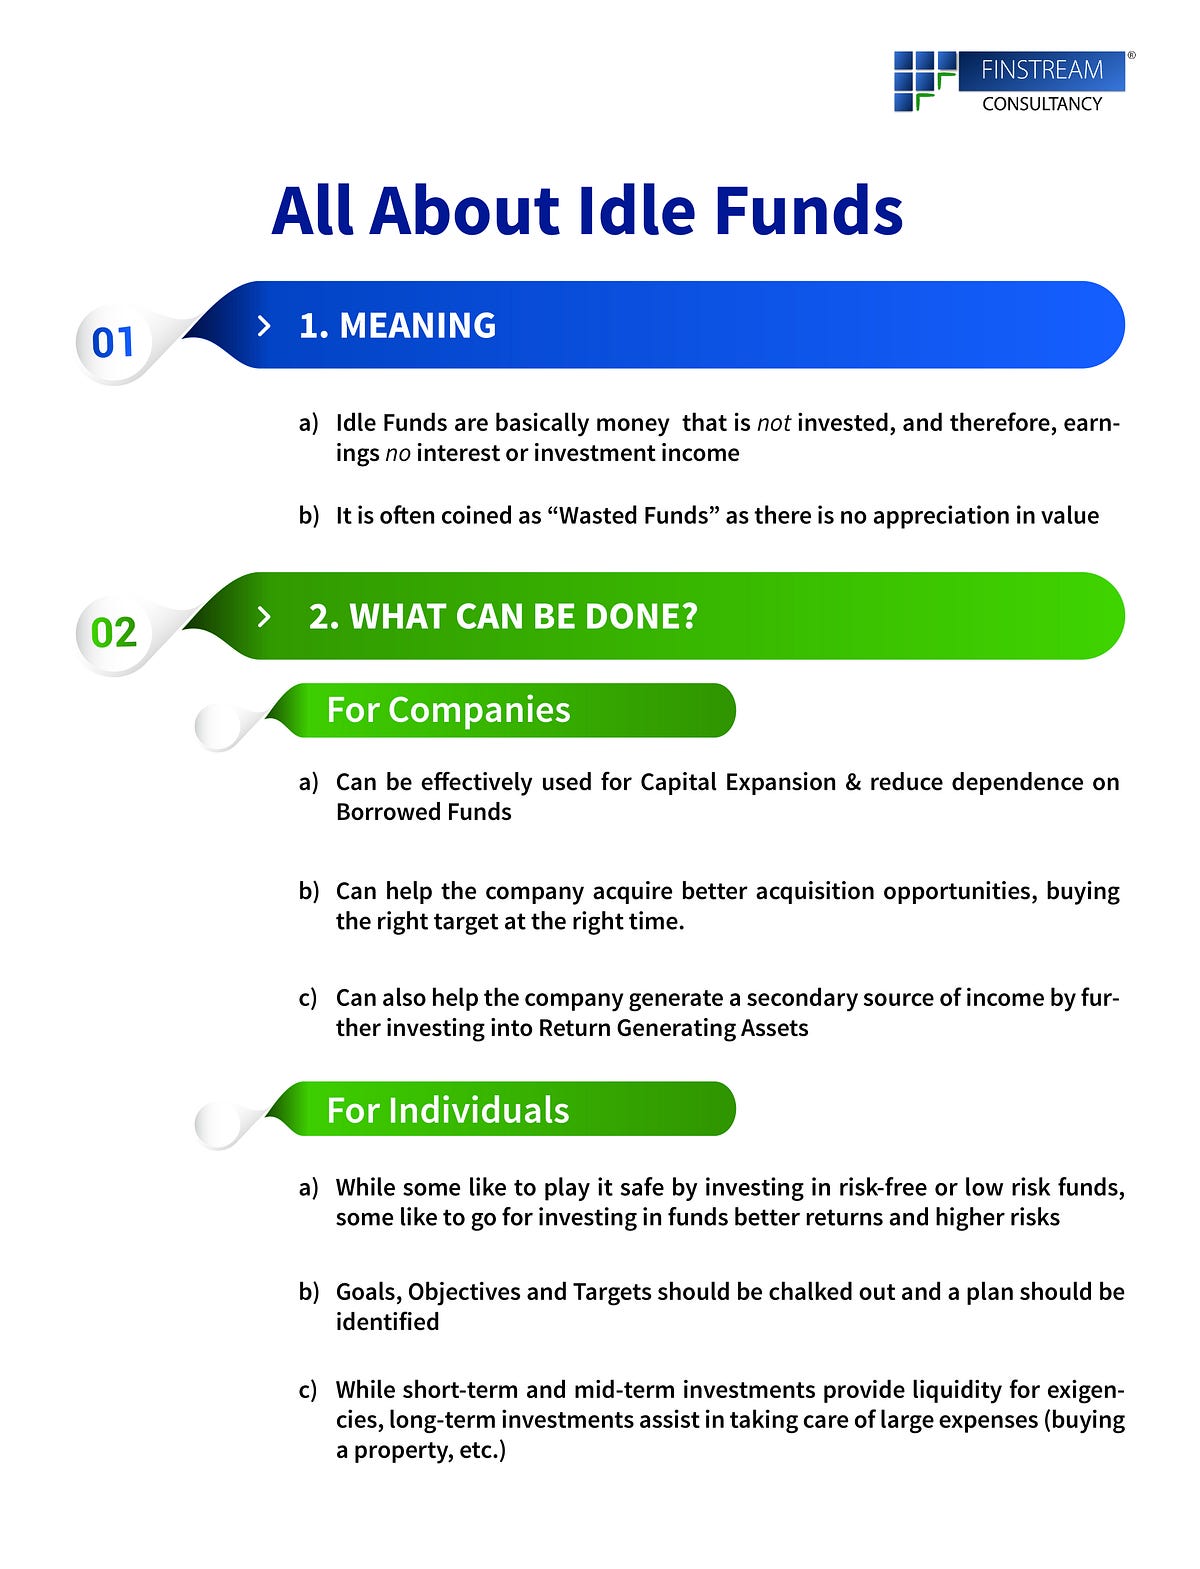 Idle funds - definition and example - Market Business News